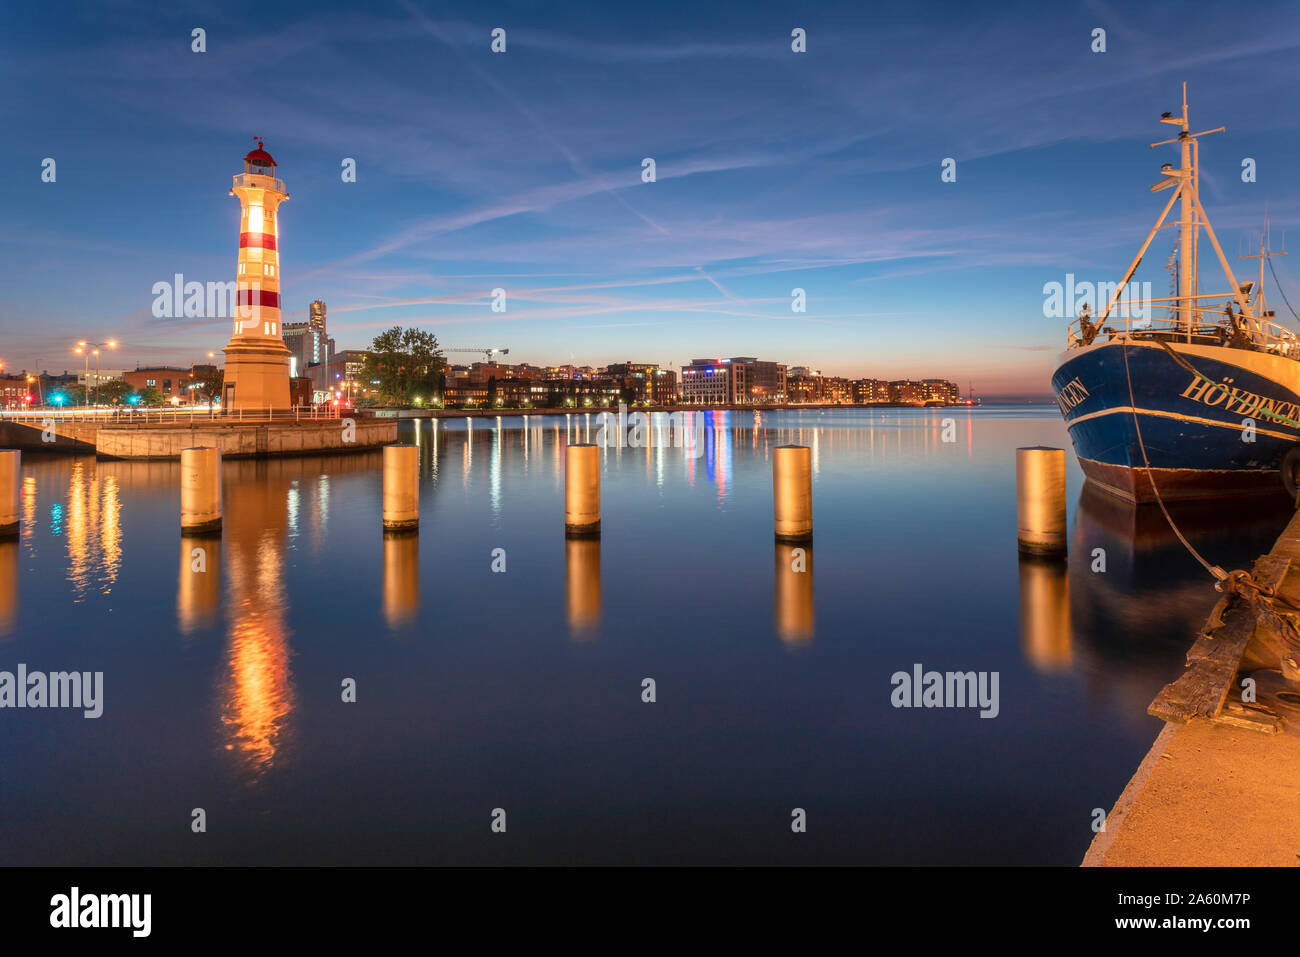 Illuminated lighthouse by river against sky at Malmo, Sweden Stock Photo